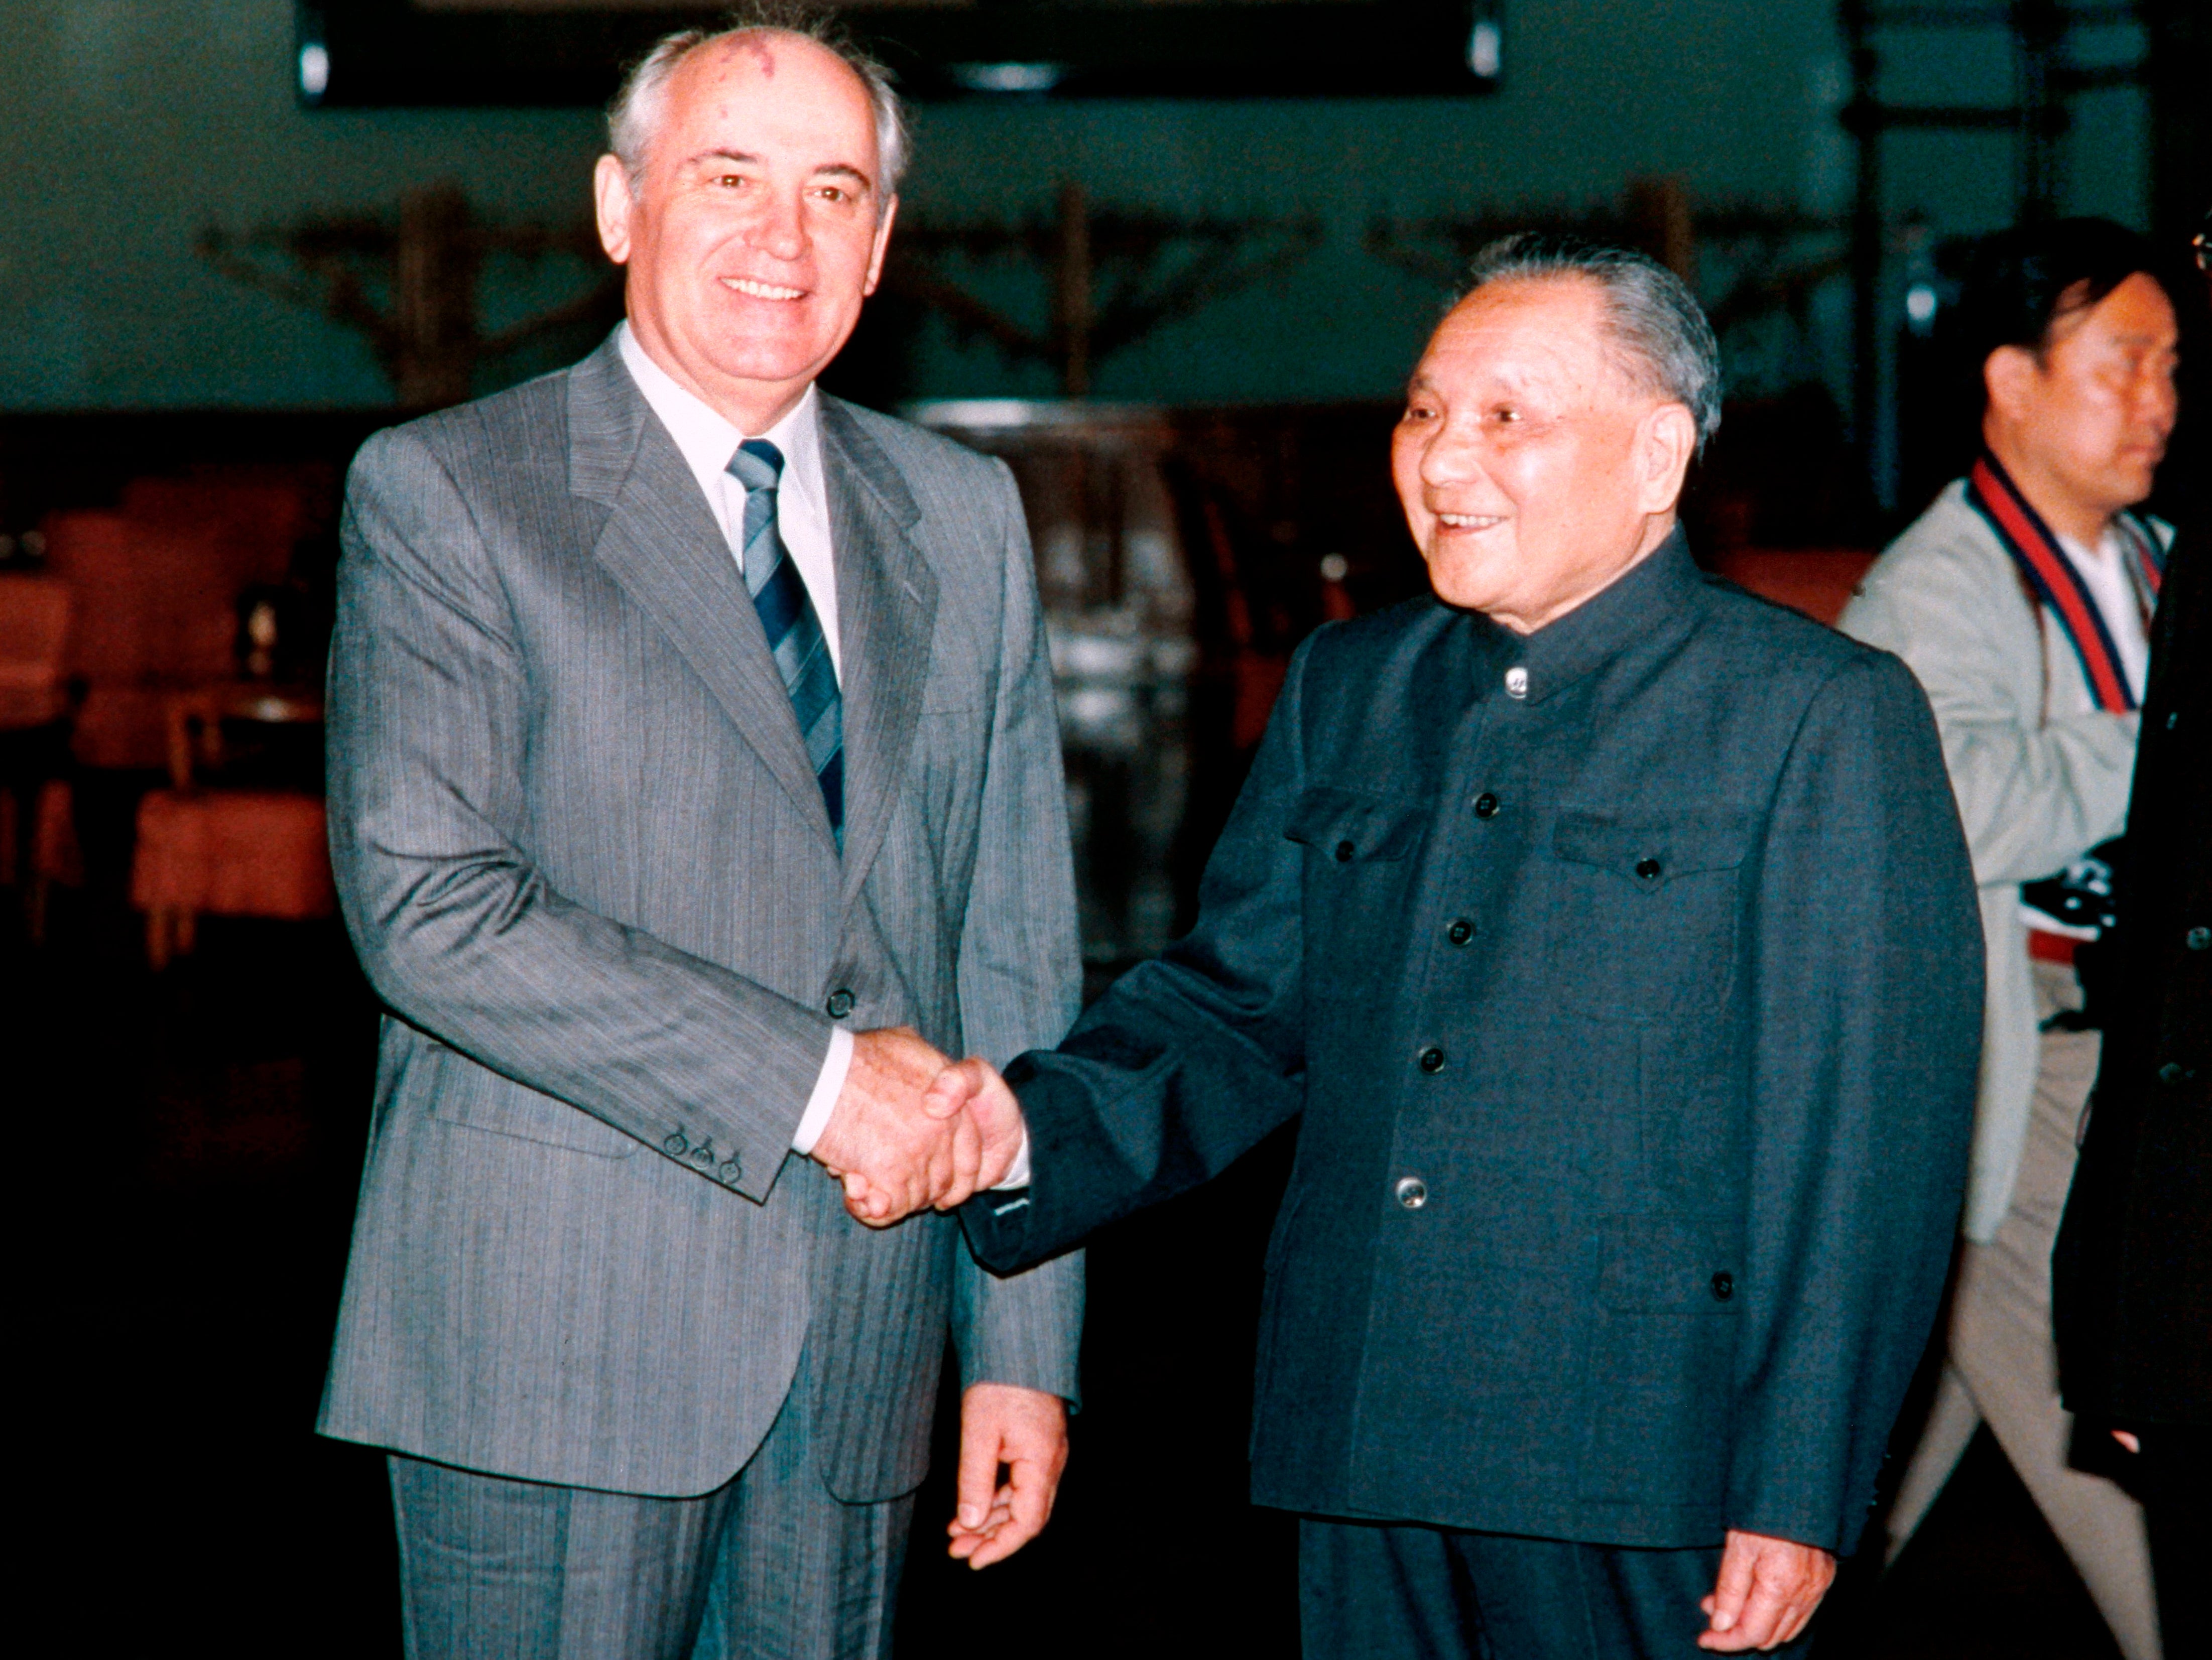 Gorbachev with Deng Xiaoping, the Chinese leader at the time, in Beijing in 1989